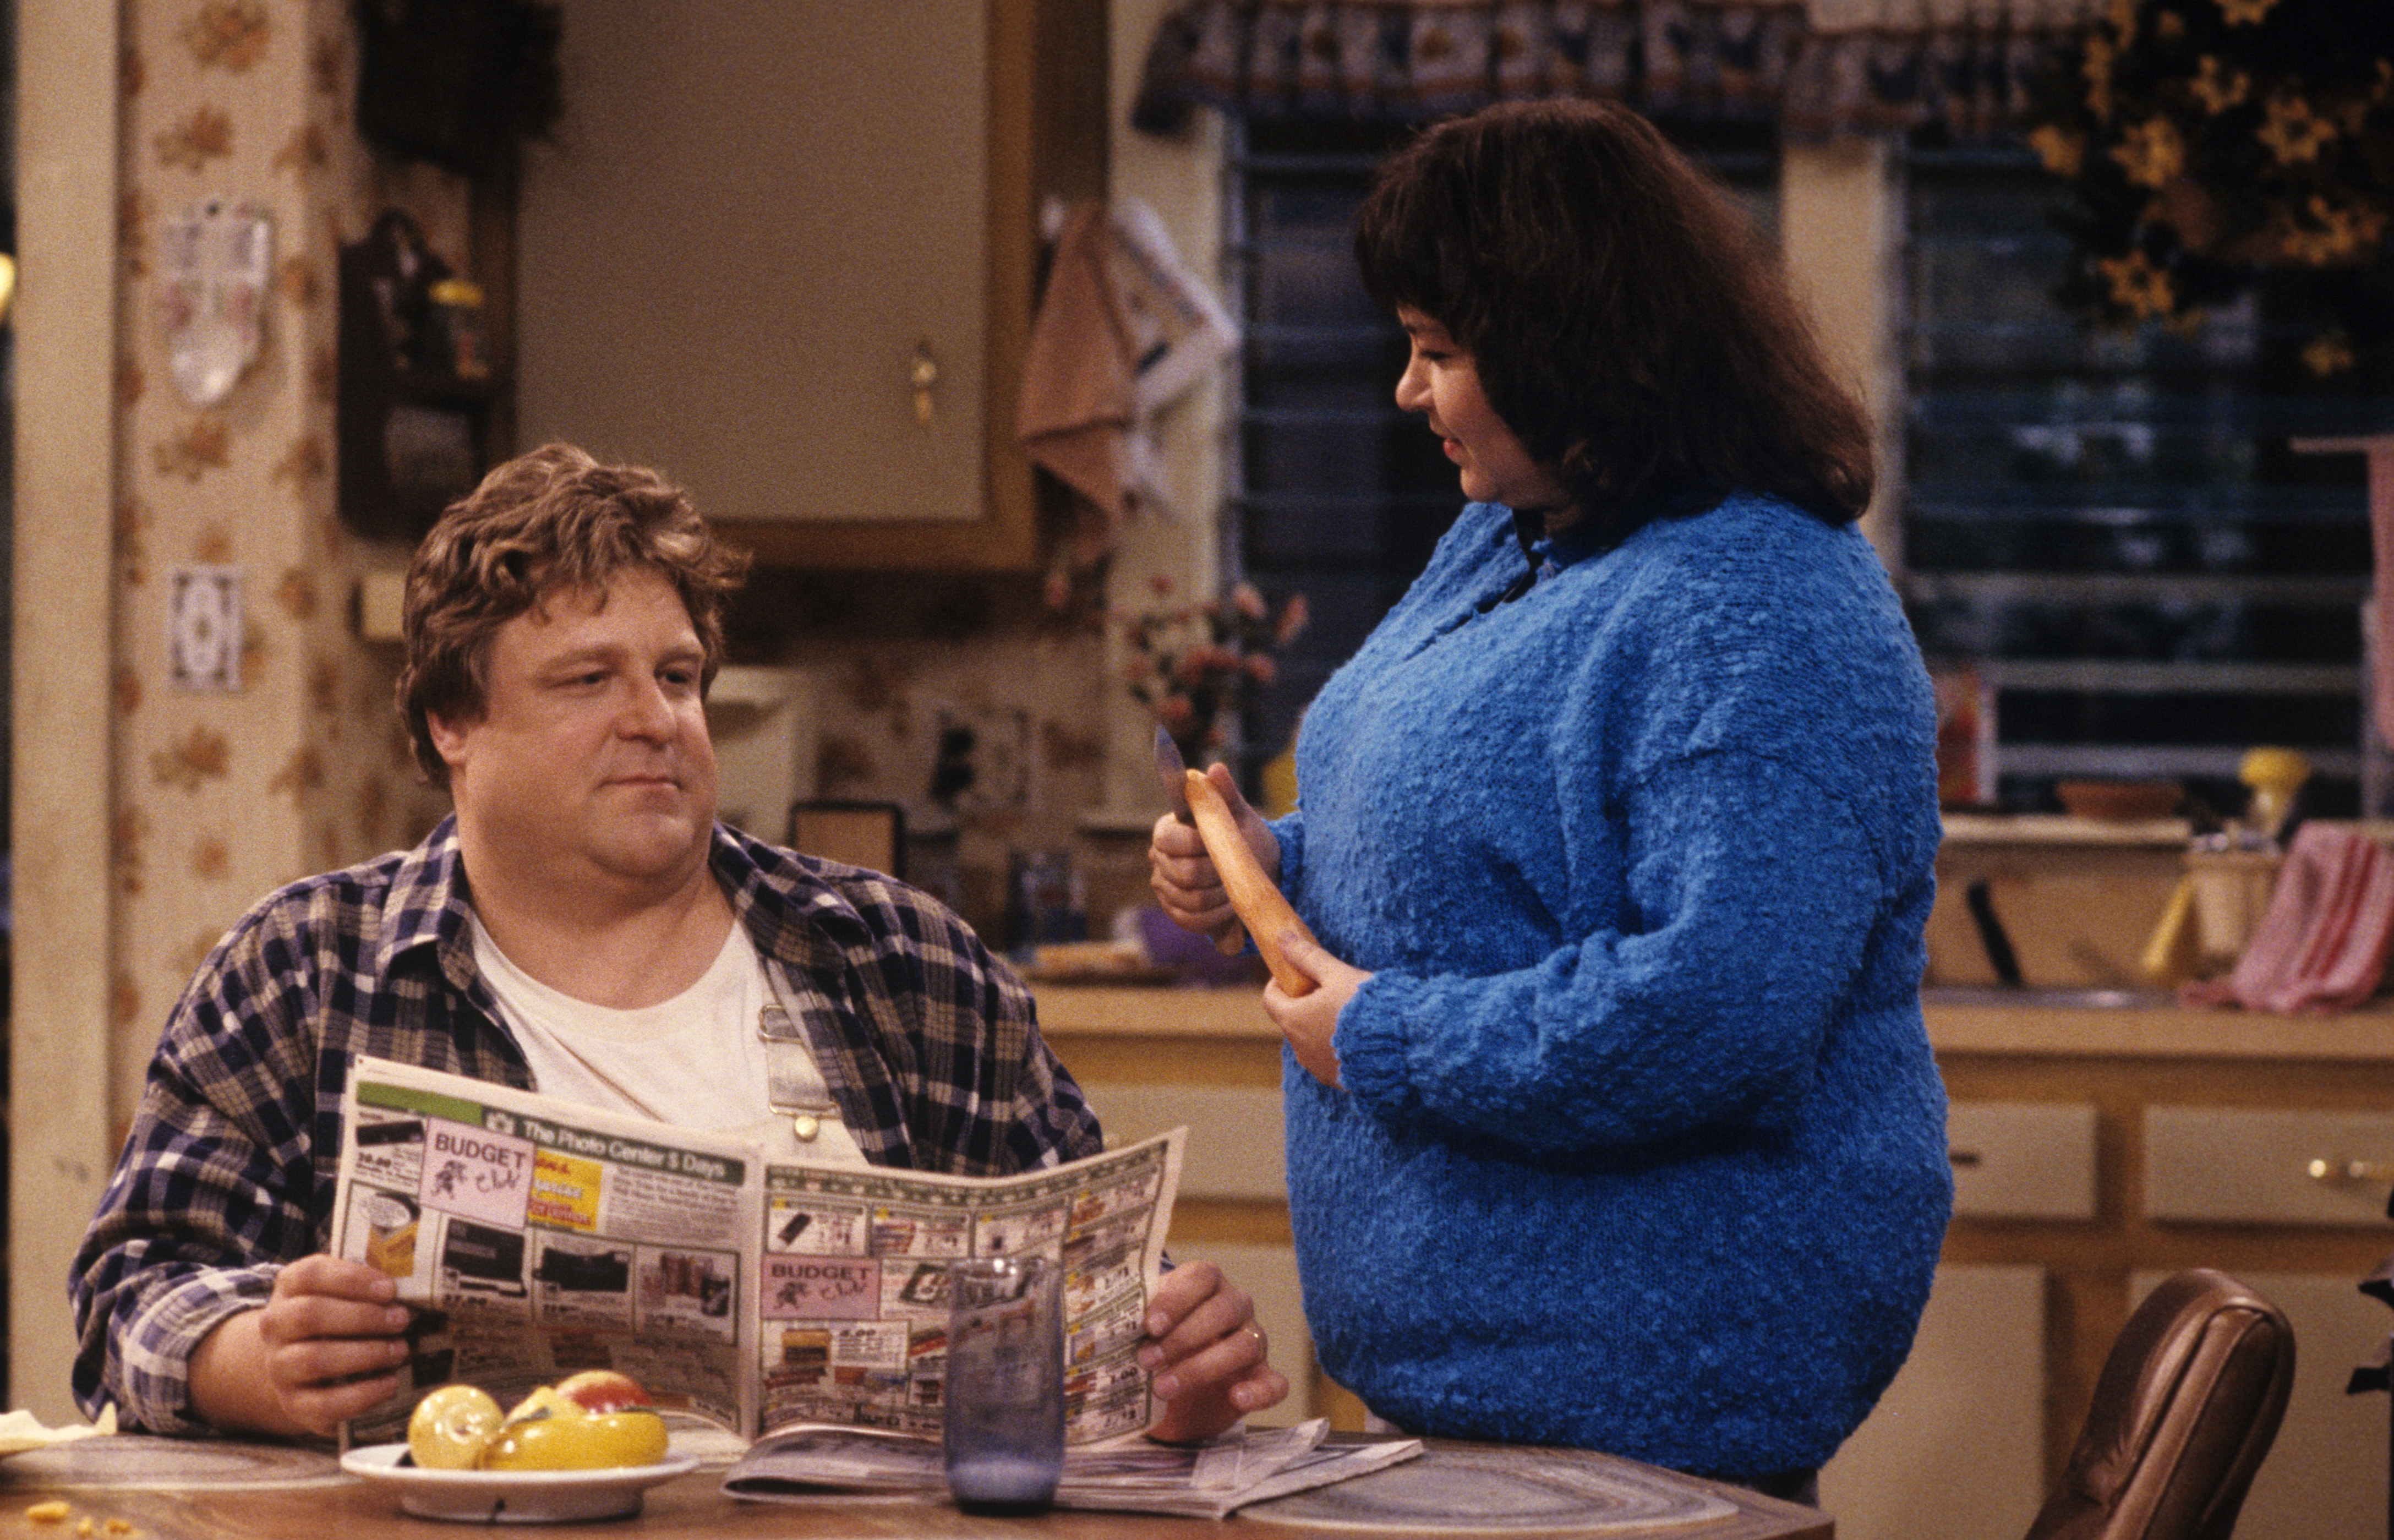 John Goodman and Roseanne Barr on "Roseanne" in 1989 | Source: Getty Images